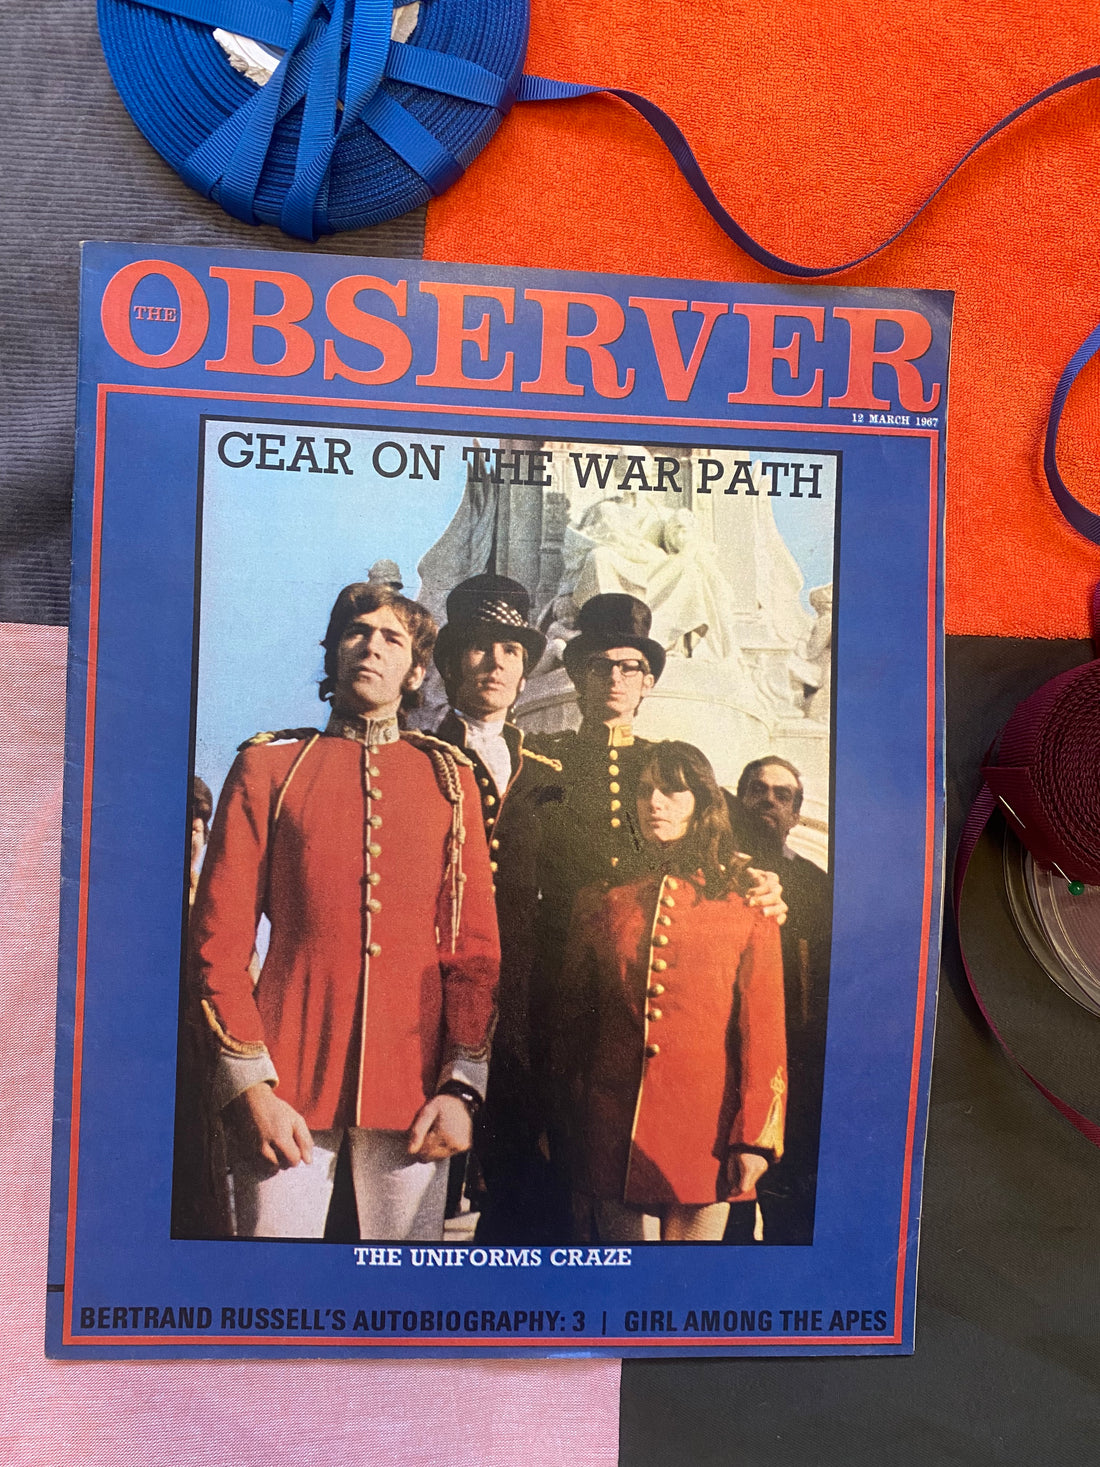 Gear on the war path - The Observer March 1967